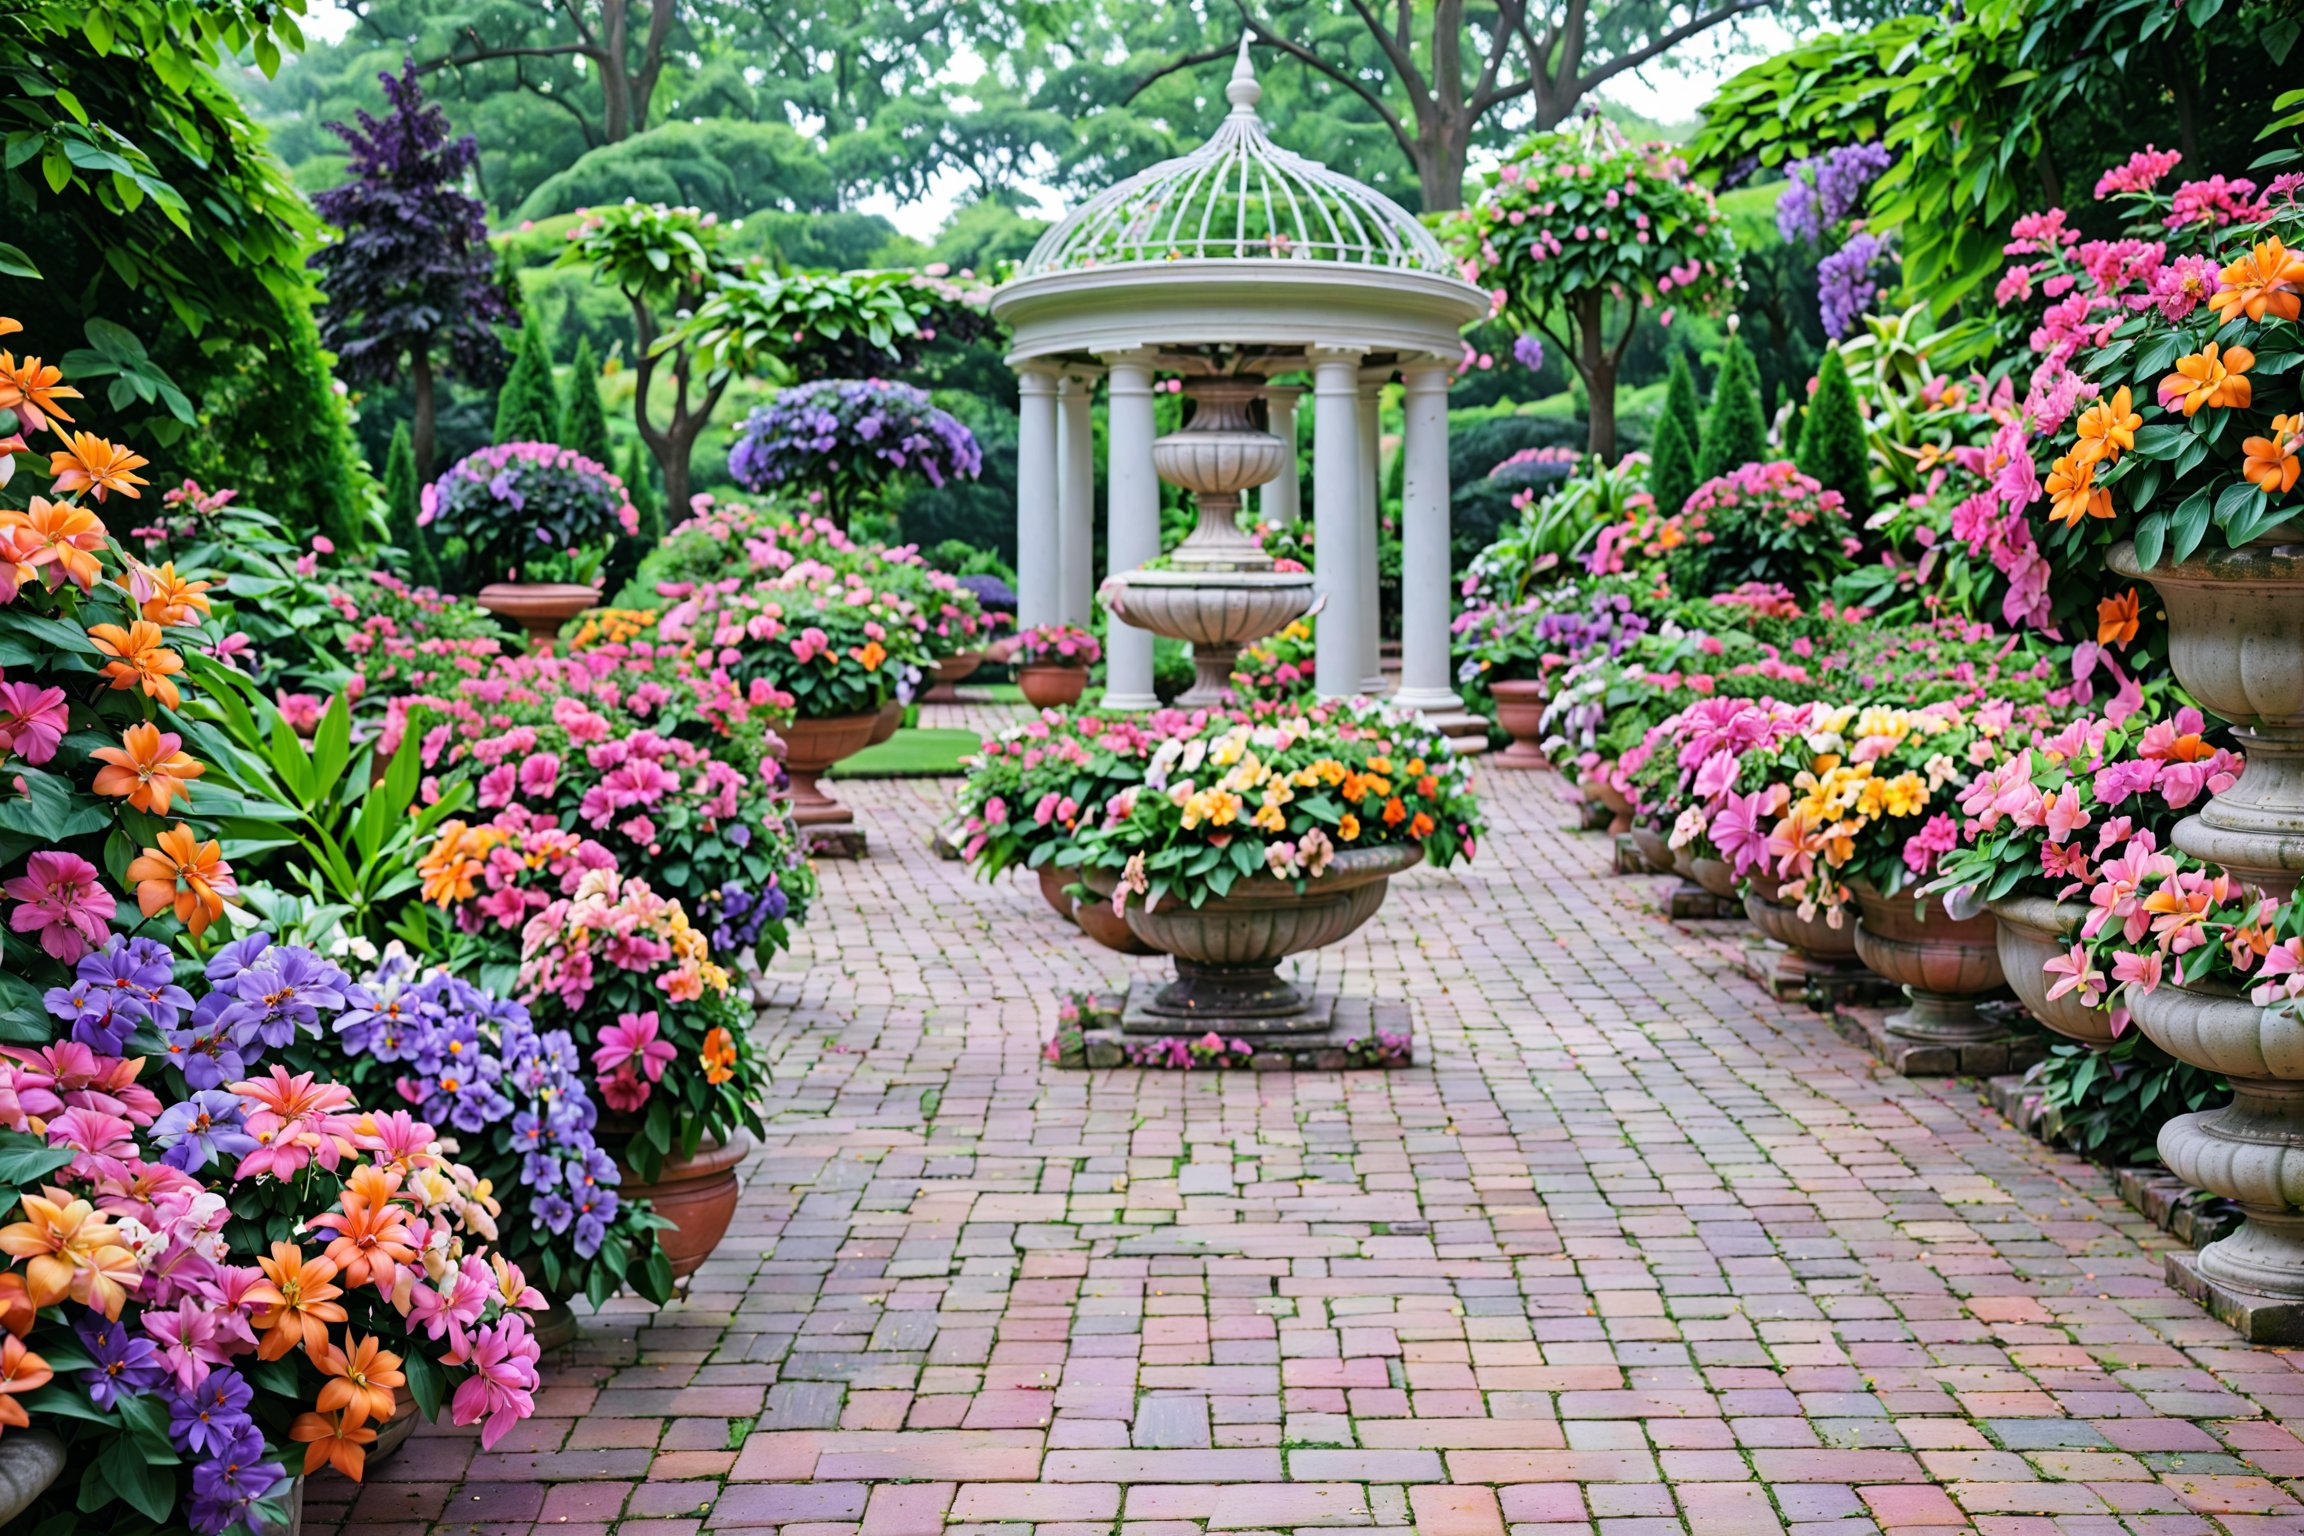 A beautifully manicured garden with a central stone urn overflowing with vibrant flowers in shades of pink, orange, yellow, and purple. Surrounding the urn are potted plants of various sizes and colors, arranged in a symmetrical fashion. A brick pathway leads the viewer's eye towards a white gazebo in the background, surrounded by lush green trees. The overall ambiance of the garden is serene and inviting, with a touch of elegance provided by the stone structures and meticulous planting.